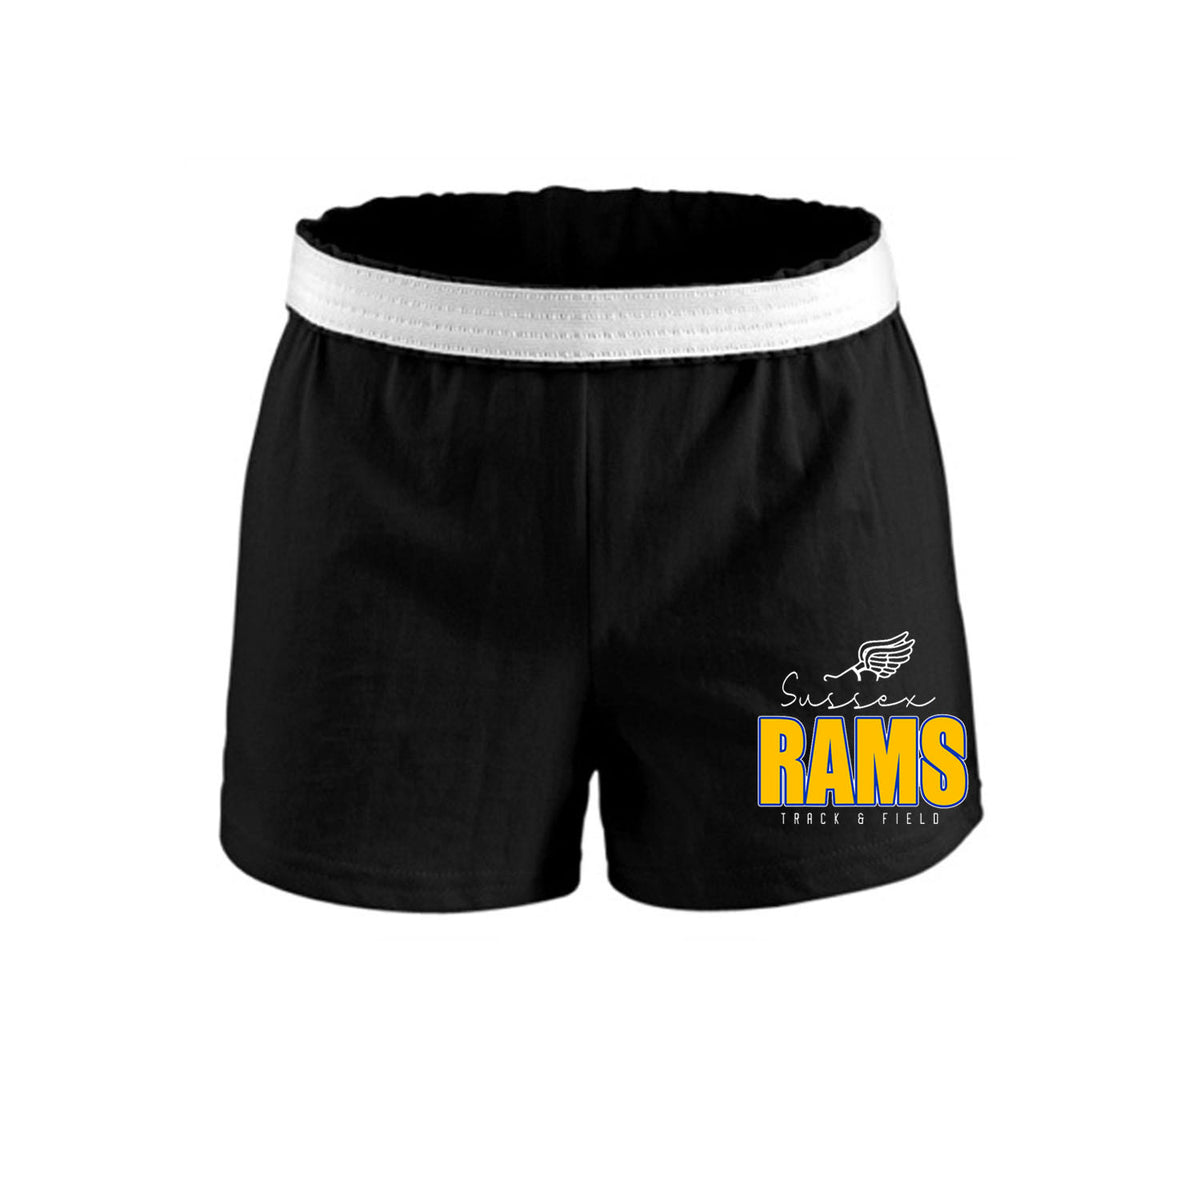 Sussex Rams Track girls Shorts Design 4